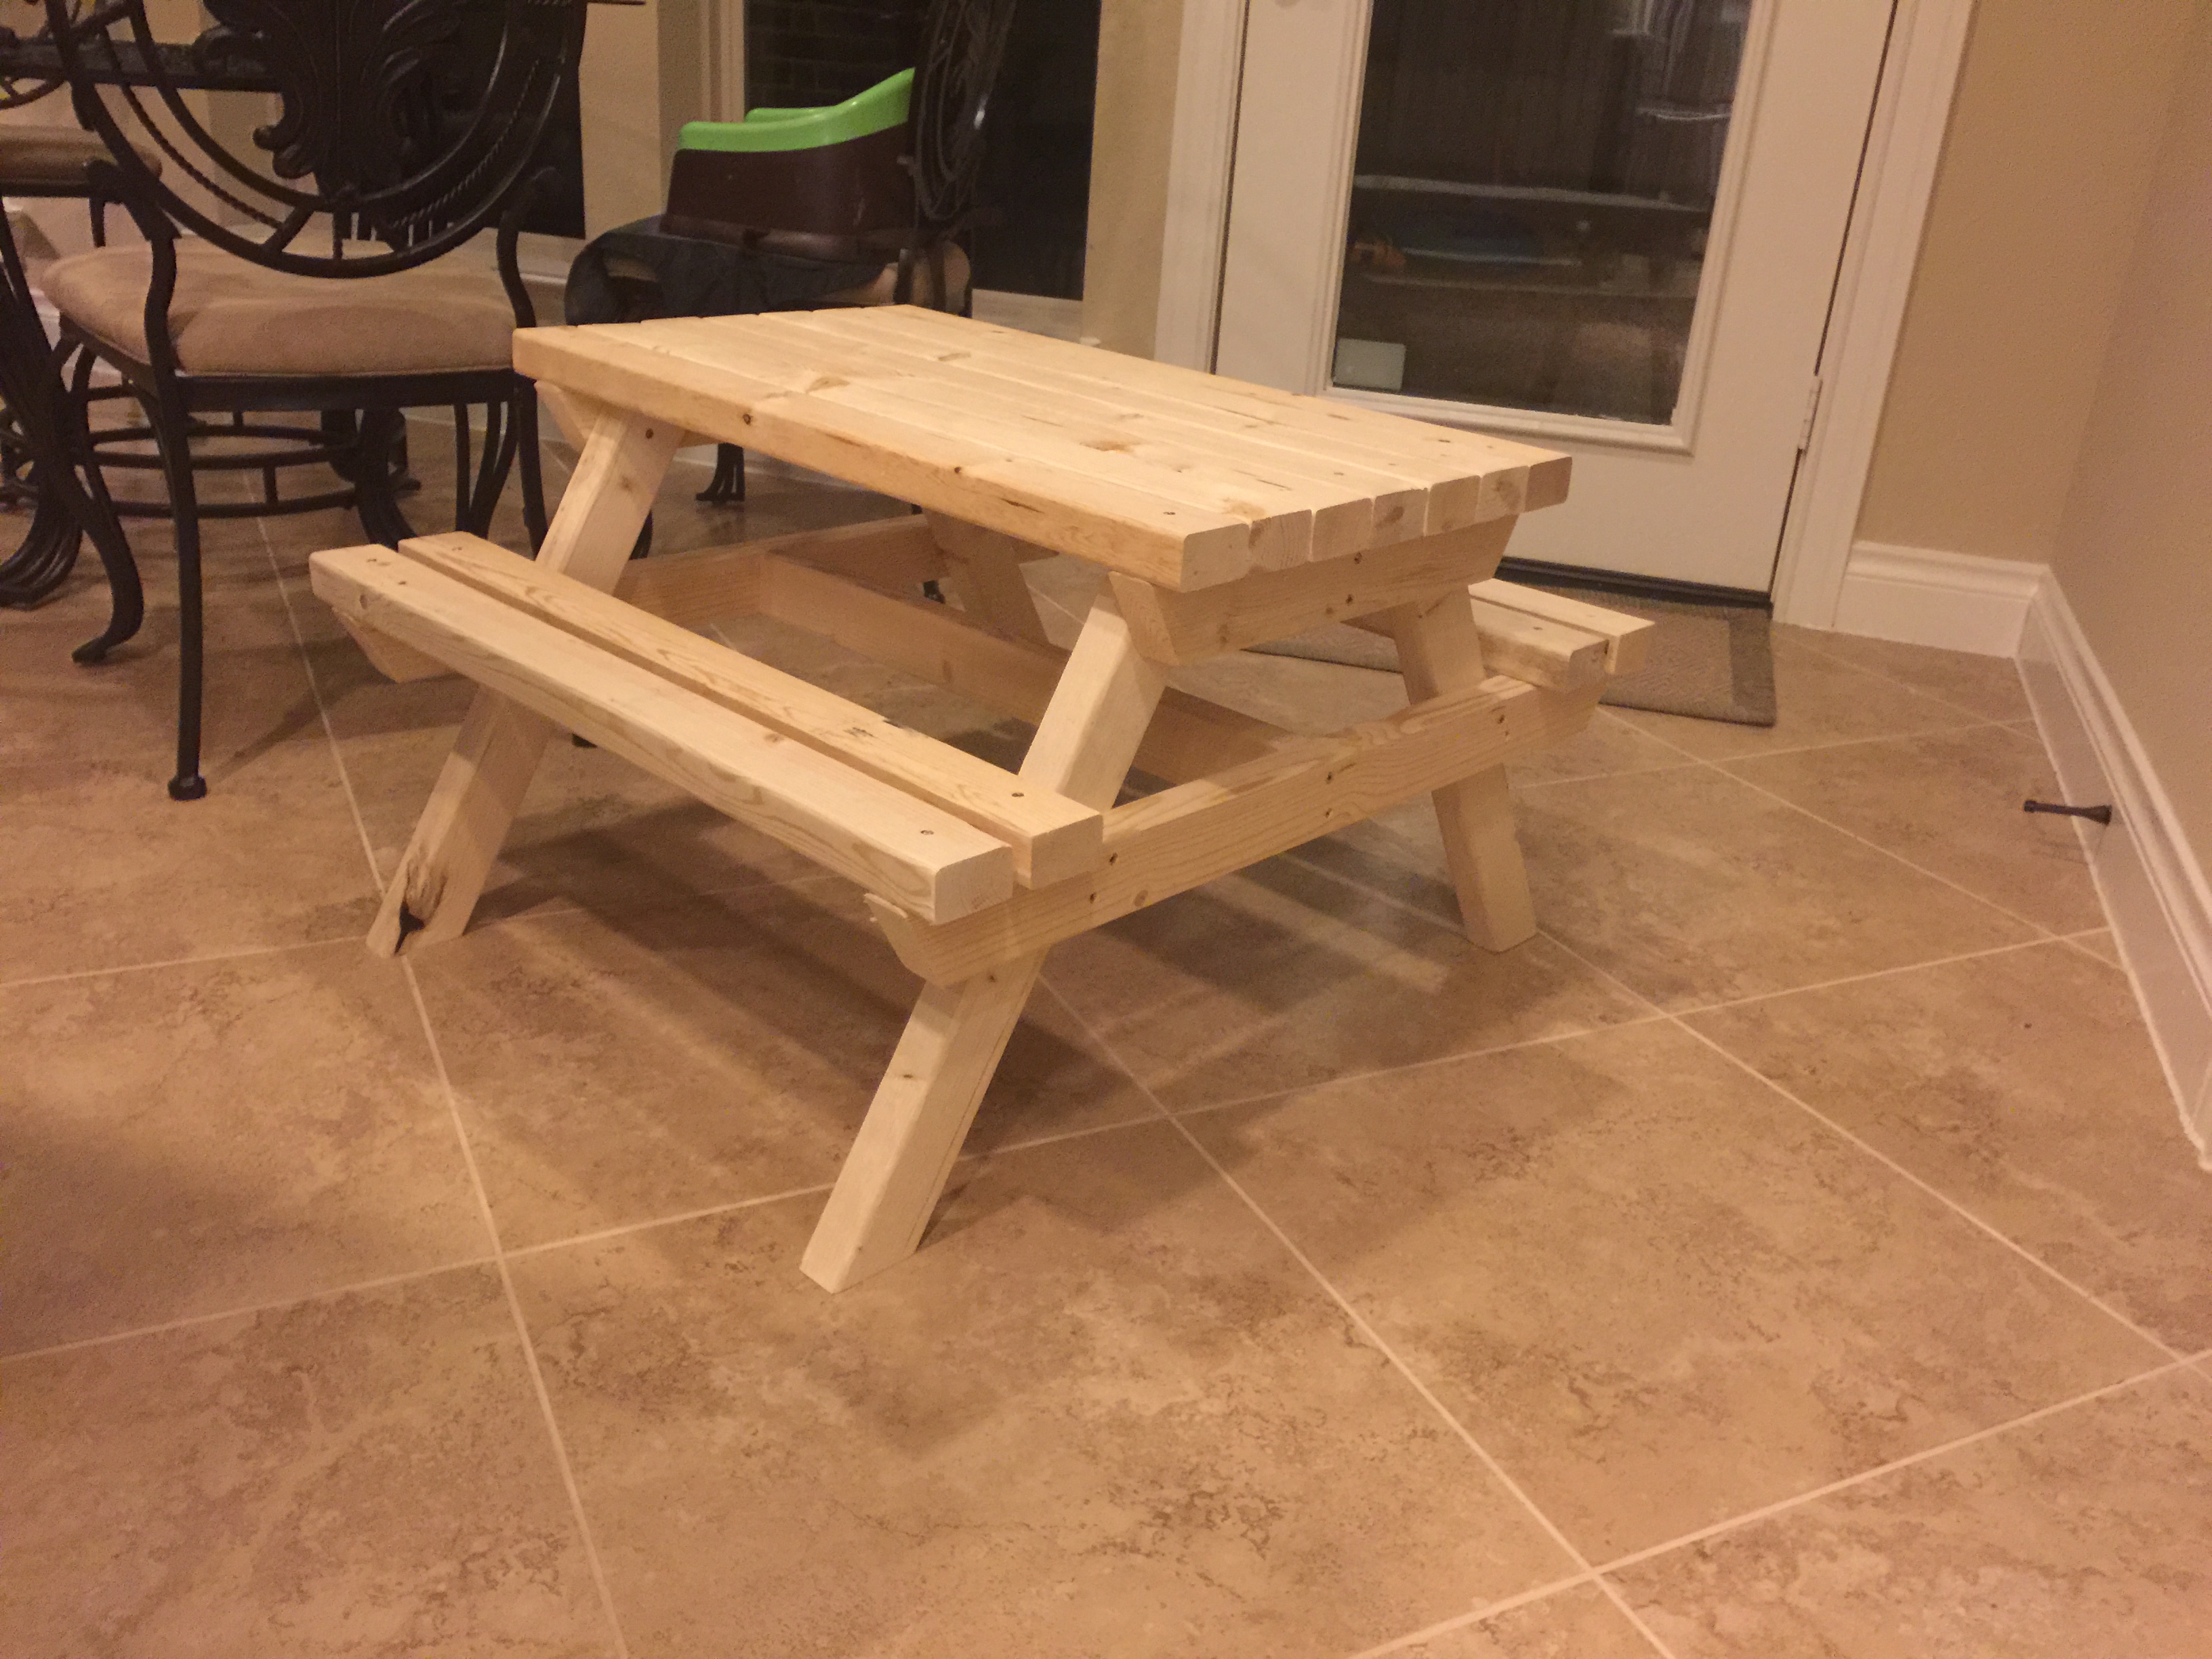 Toddler Sized Picnic Table Ana White